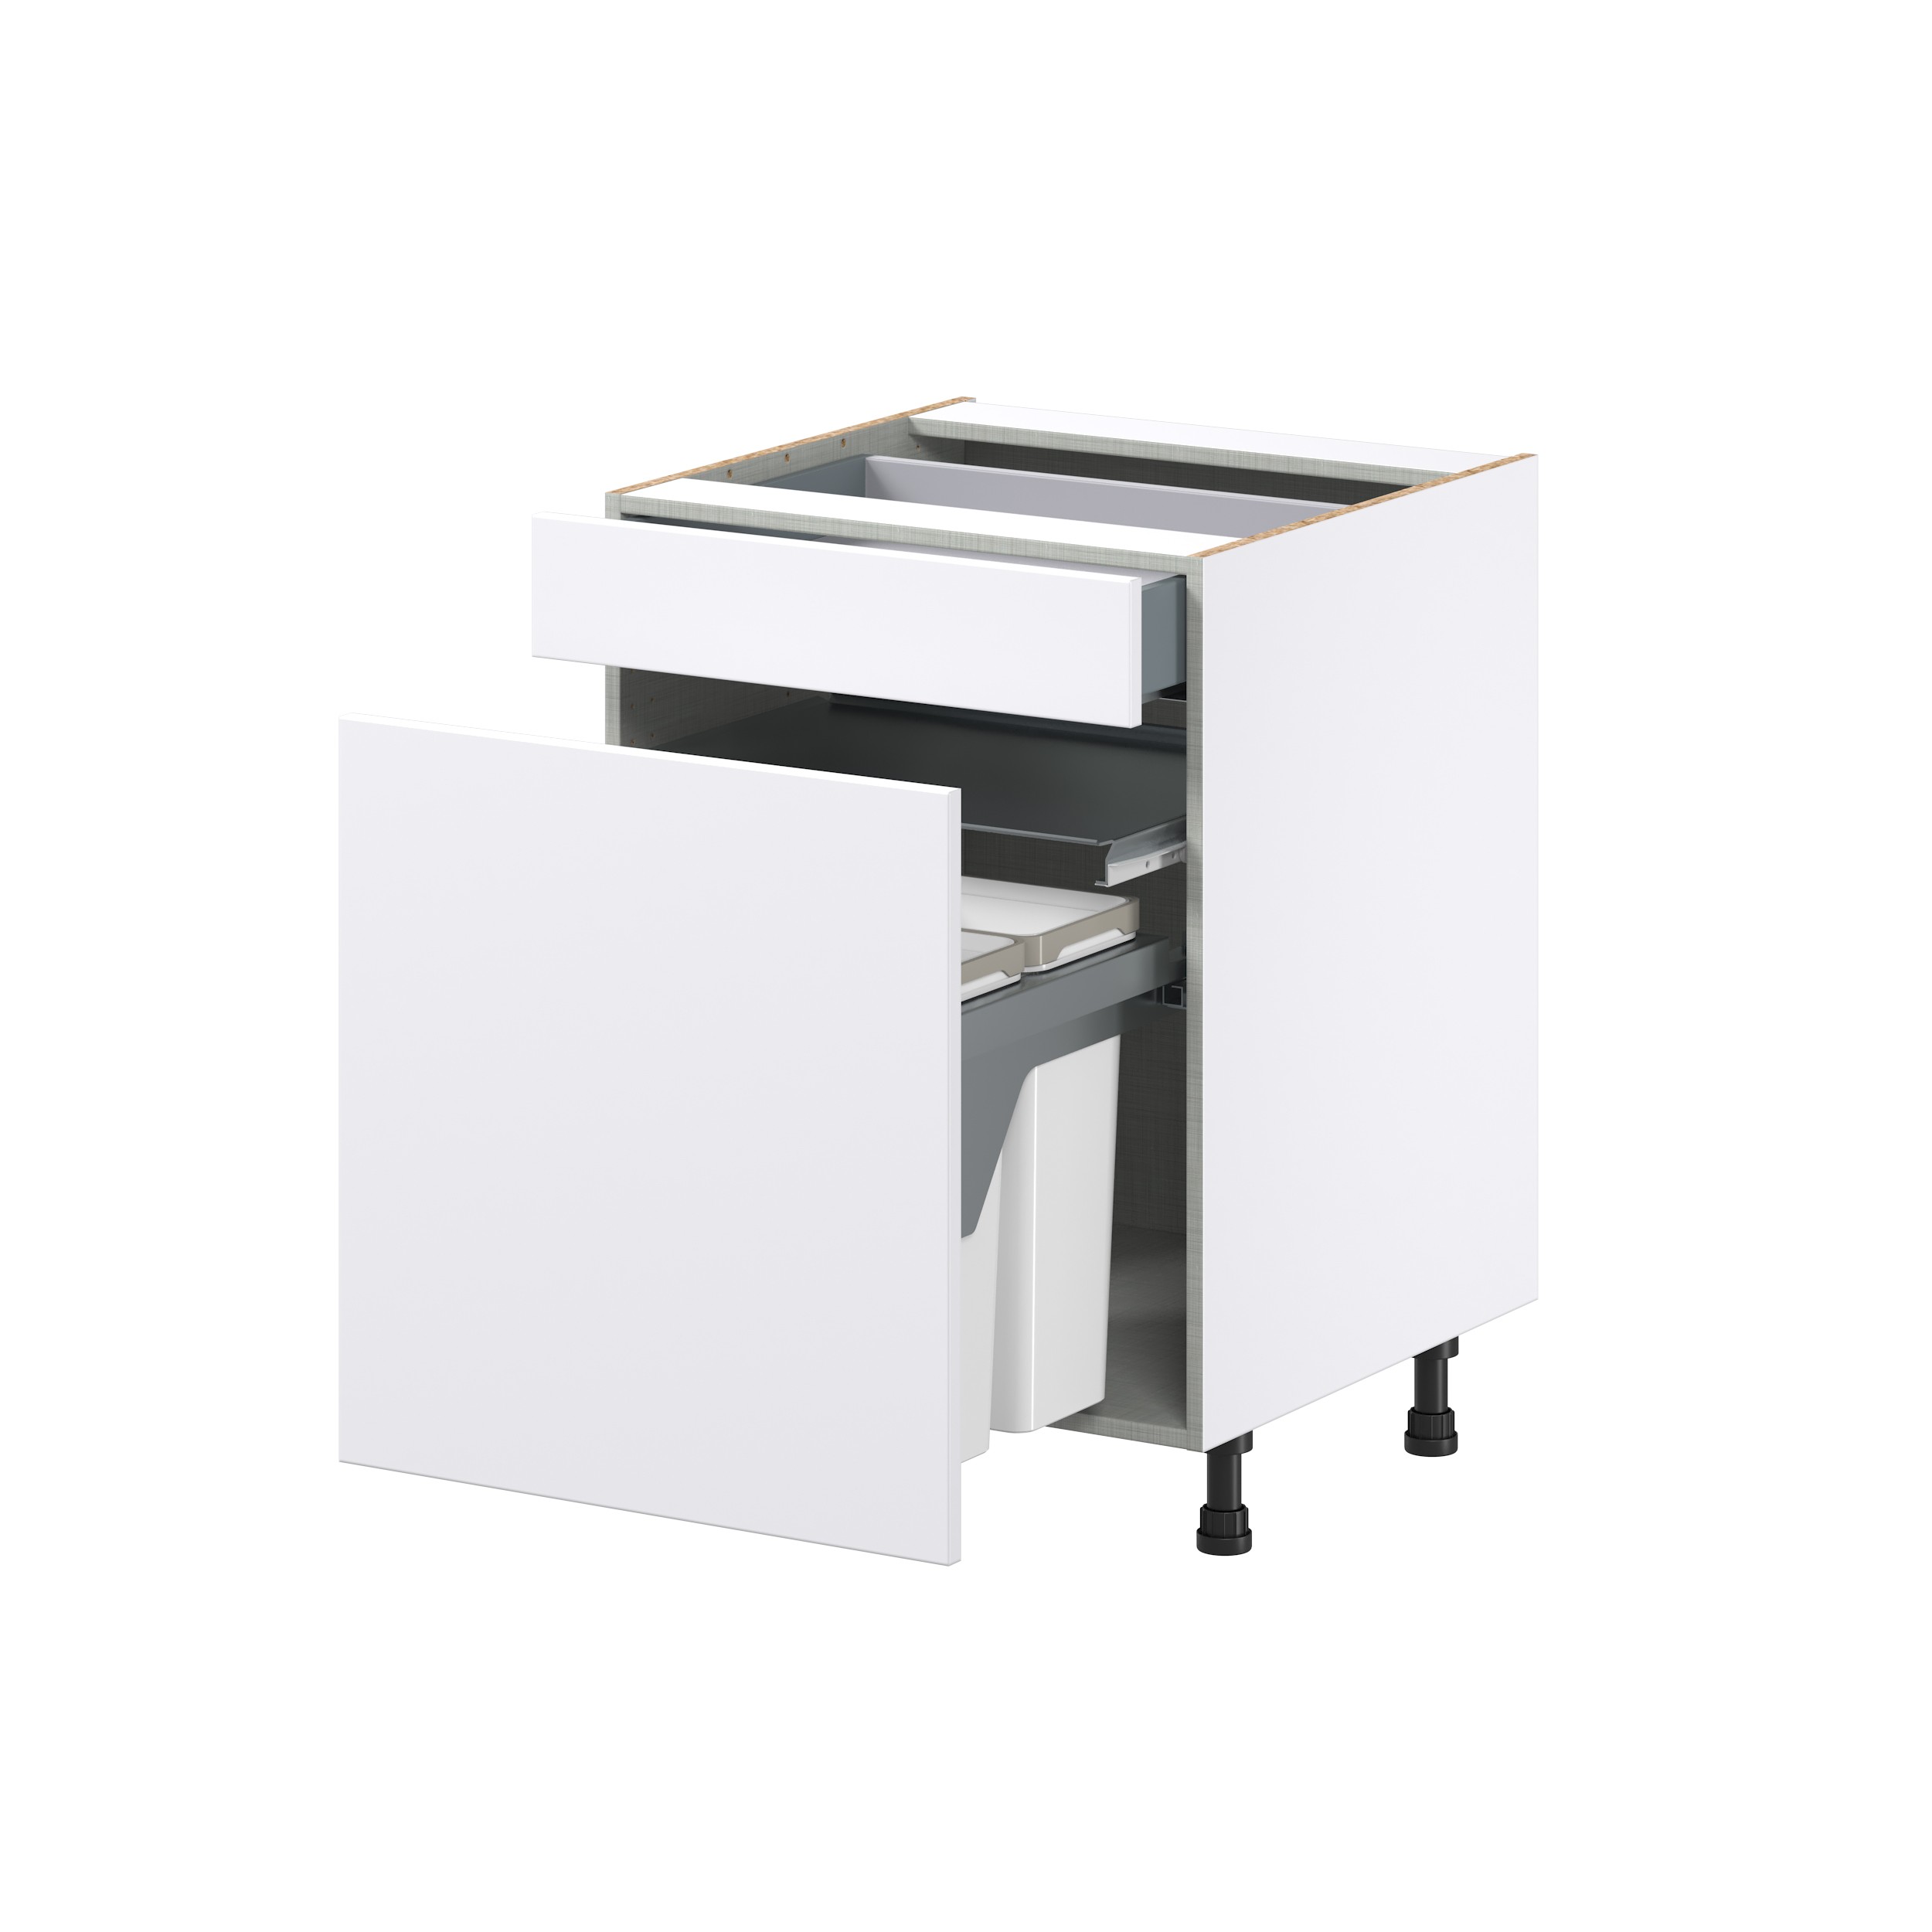 Lily Bright White Slab Assembled with 1 Drawer and Pull Out  3 Waste Bins Kitchen Cabinet (24in. W x 34.5 in. H x 24 in. D)